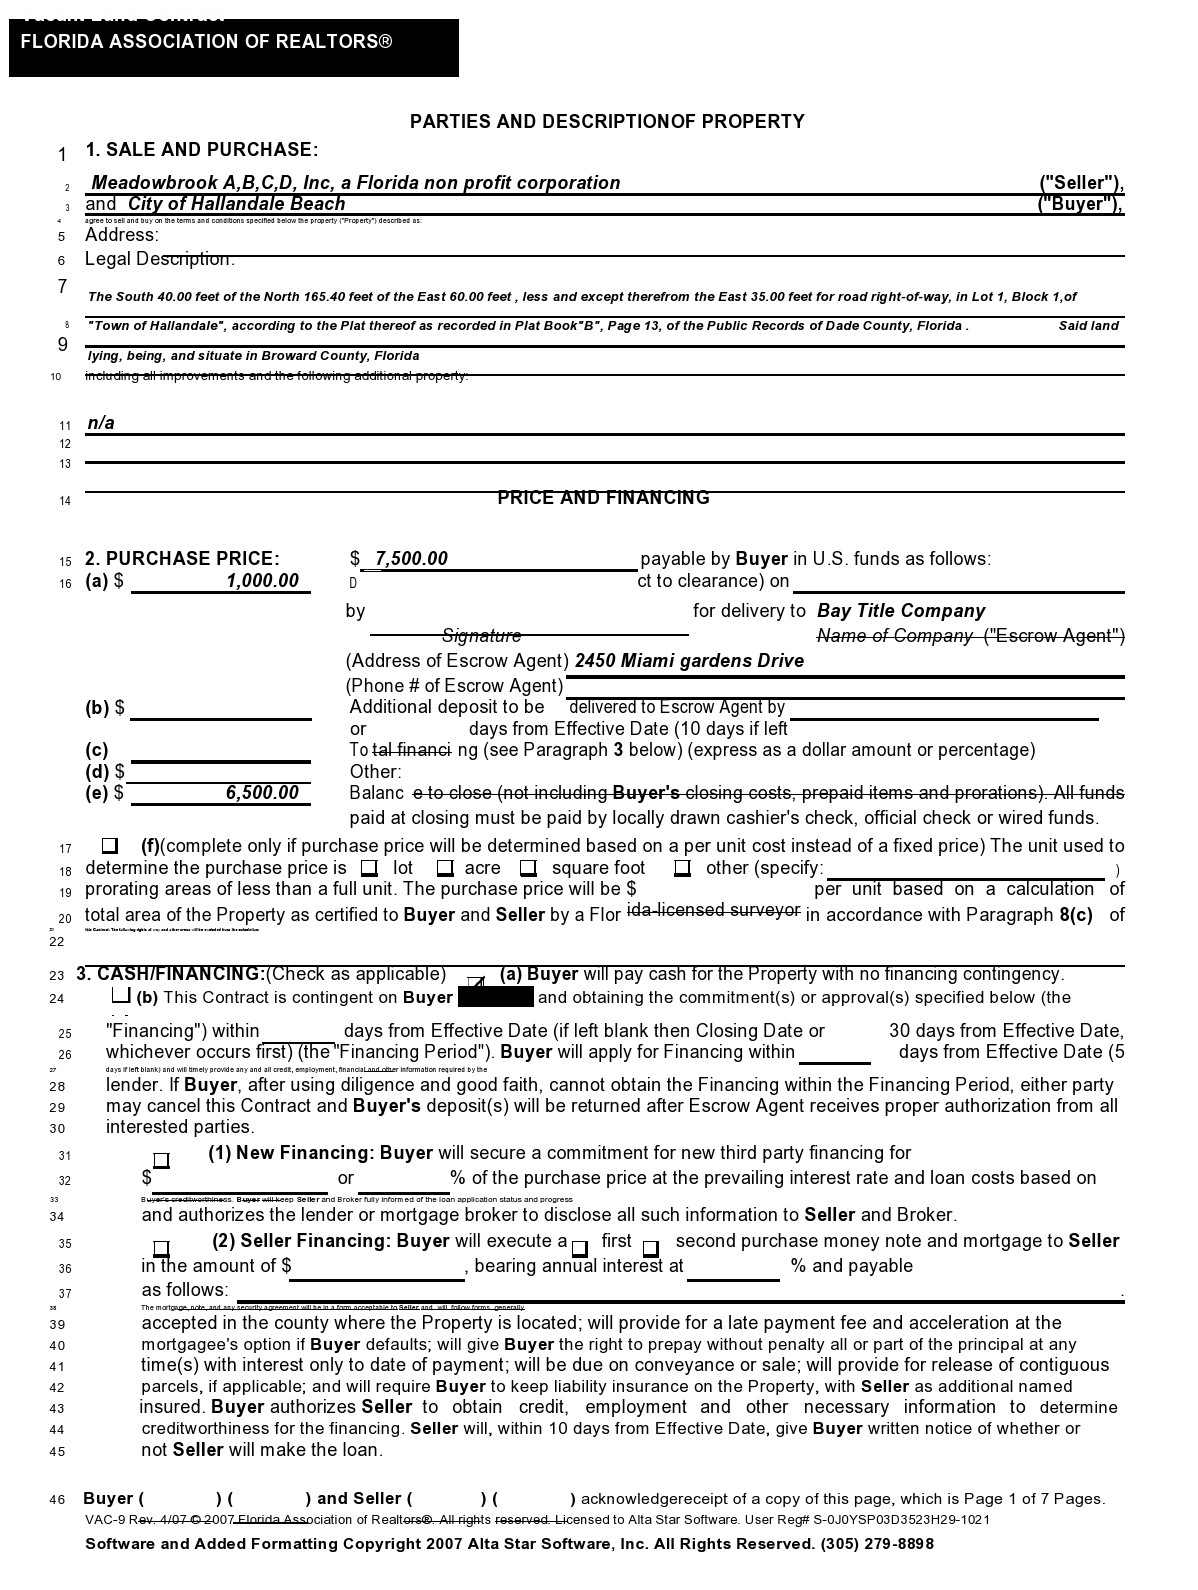 Free land contract form 30